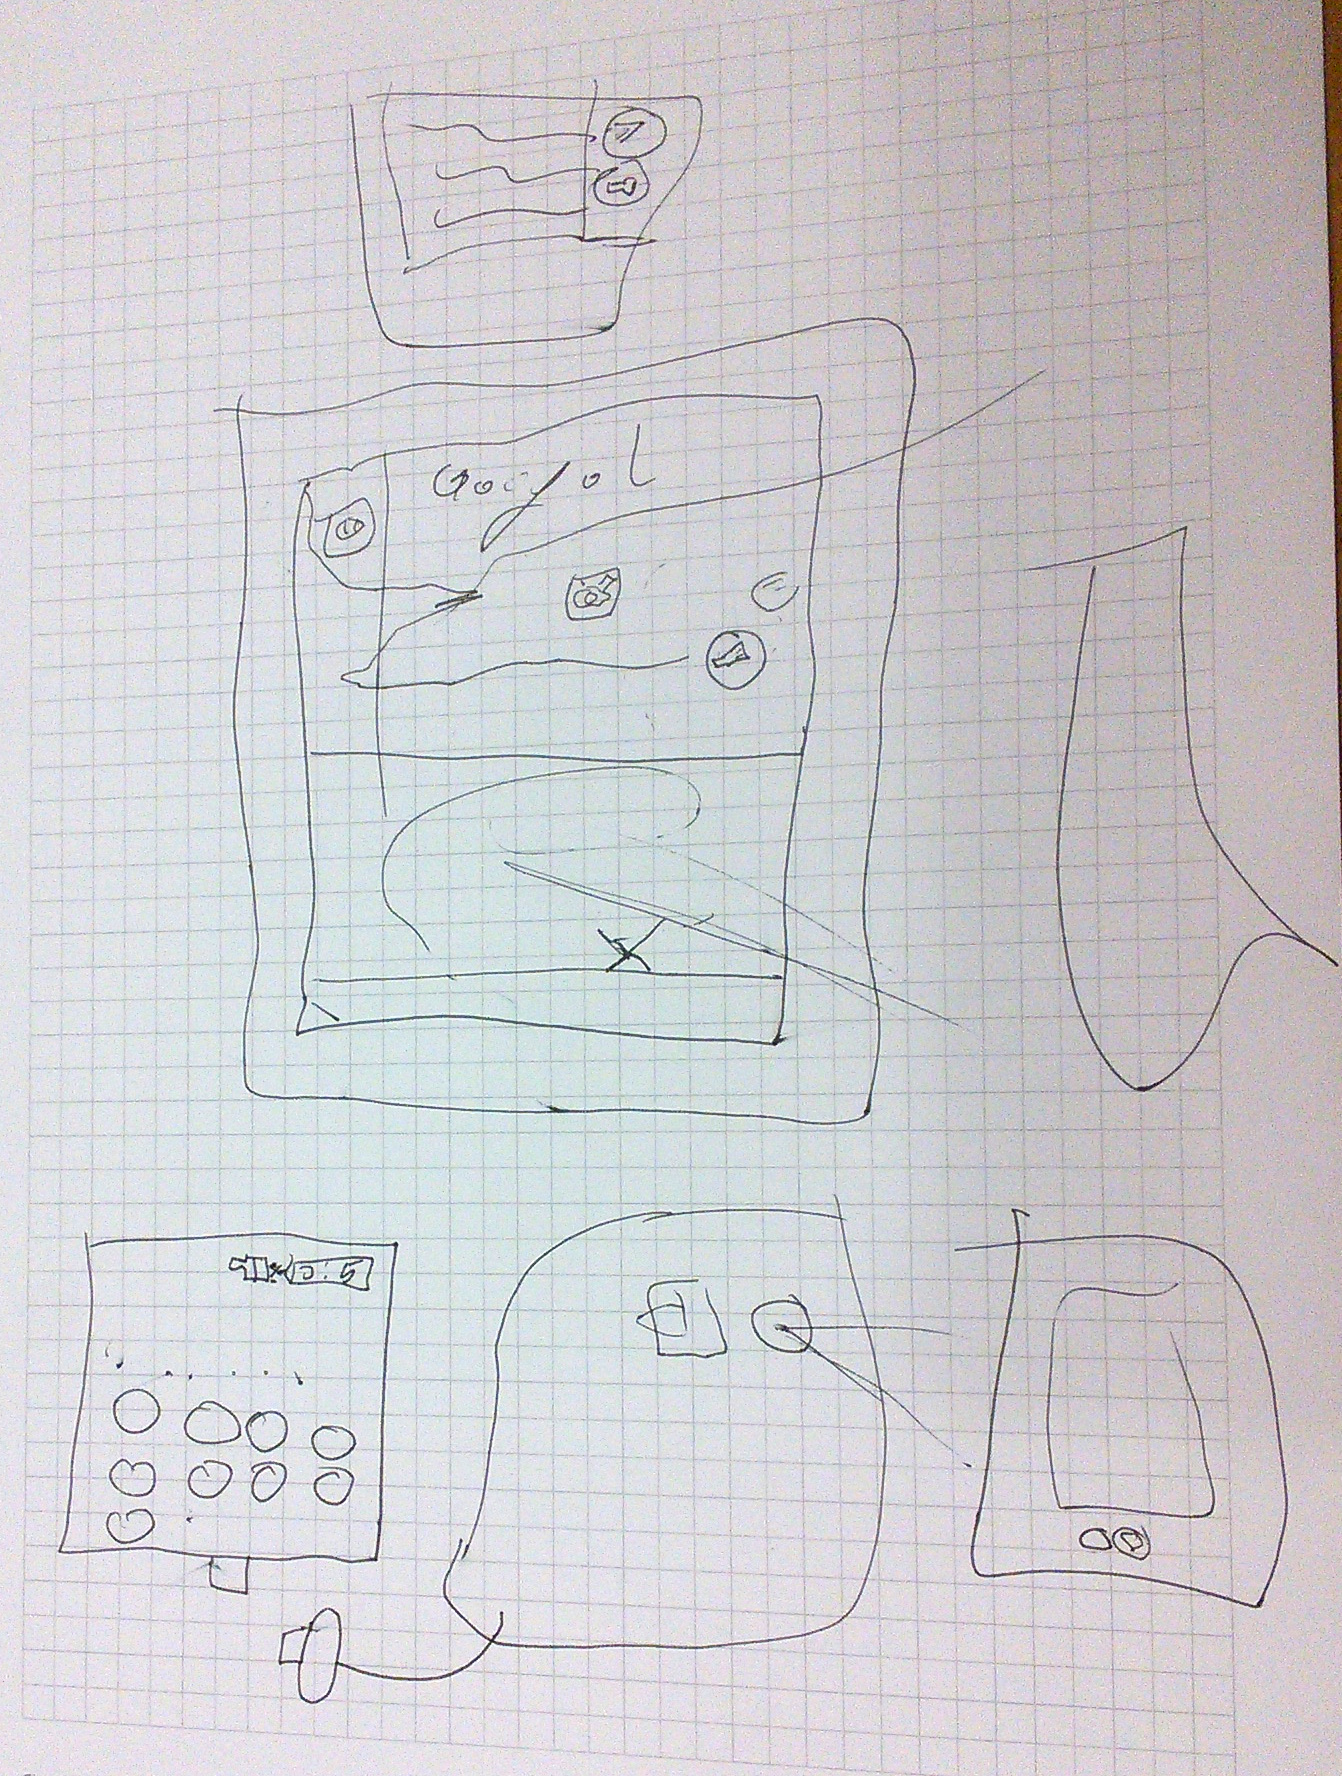 drawing of the internet by an 8 year old girl, Showing Google and the interface to call and text someone